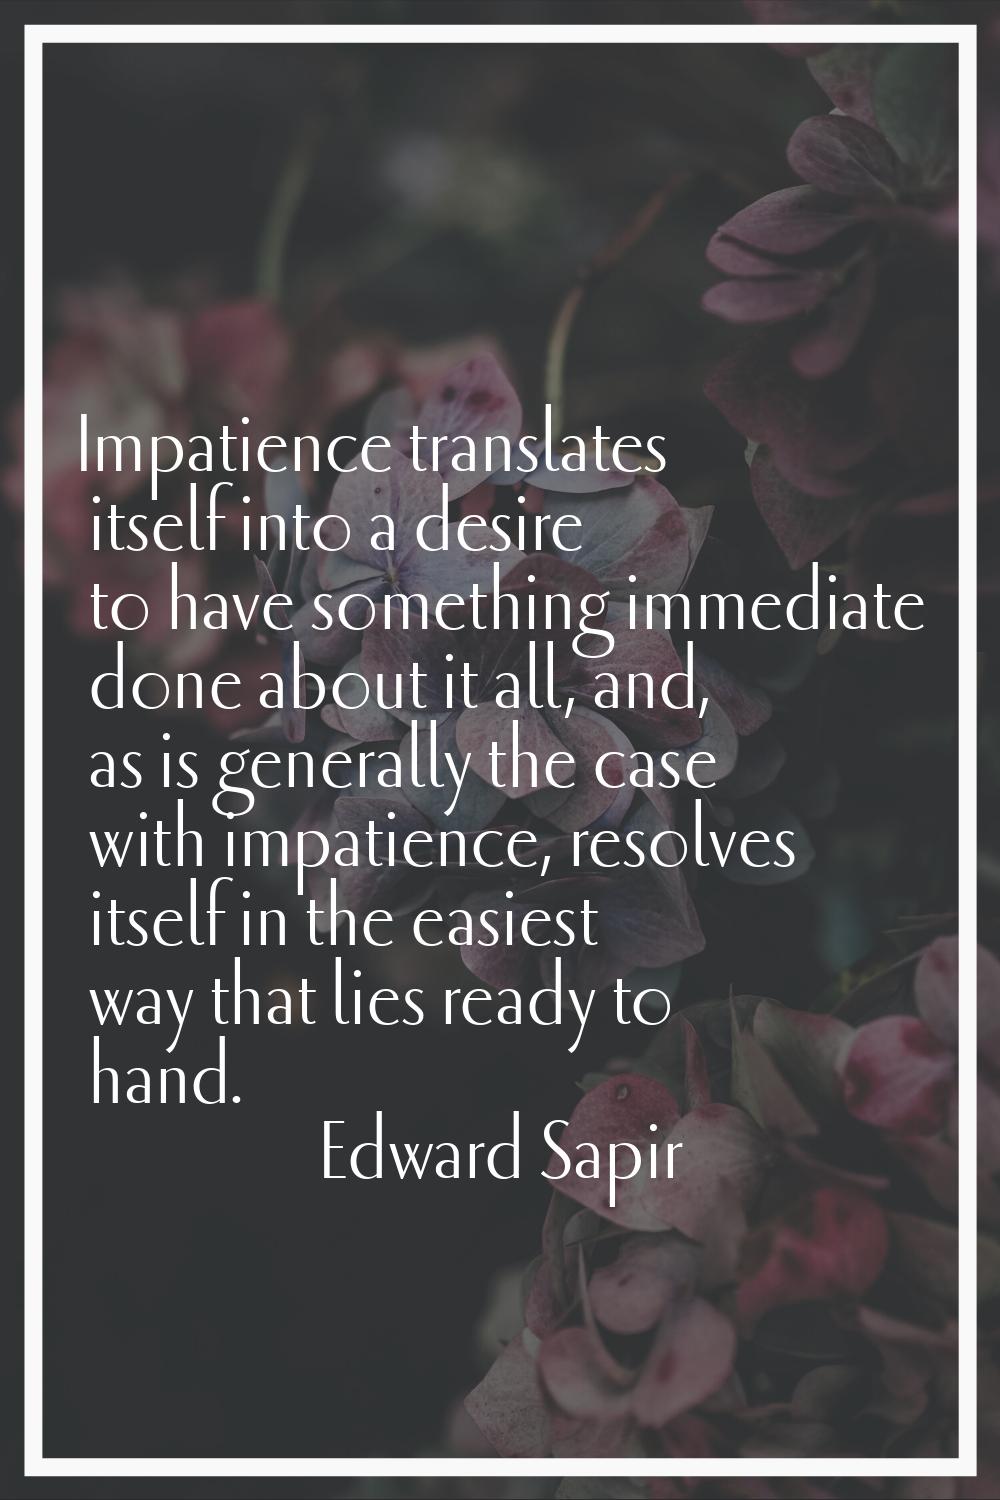 Impatience translates itself into a desire to have something immediate done about it all, and, as i